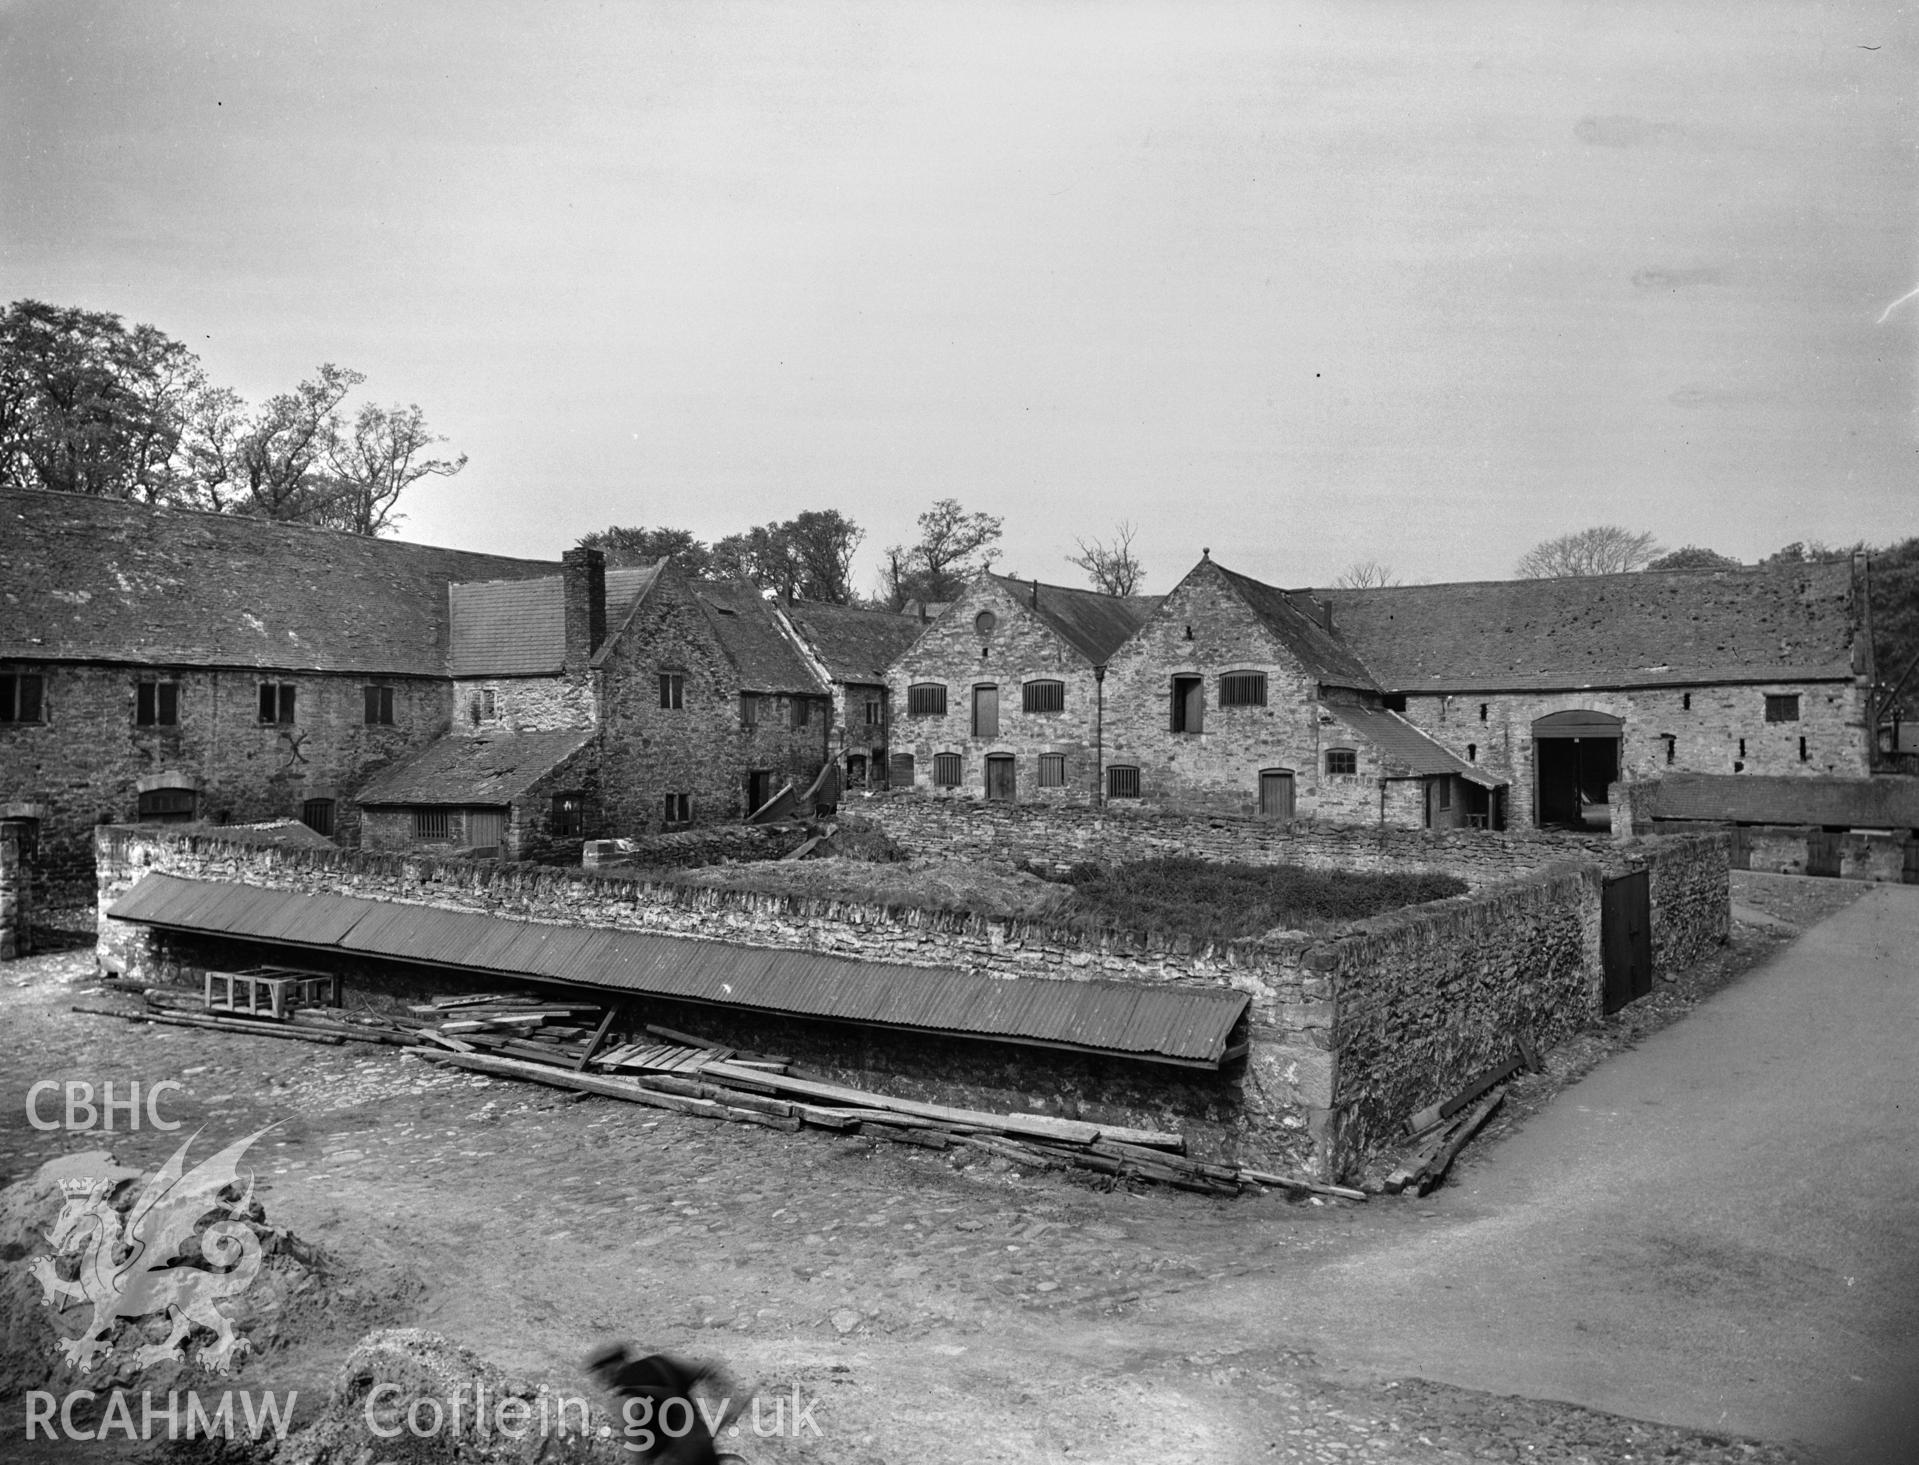 Farm buildings from the south, taken in May 1942.